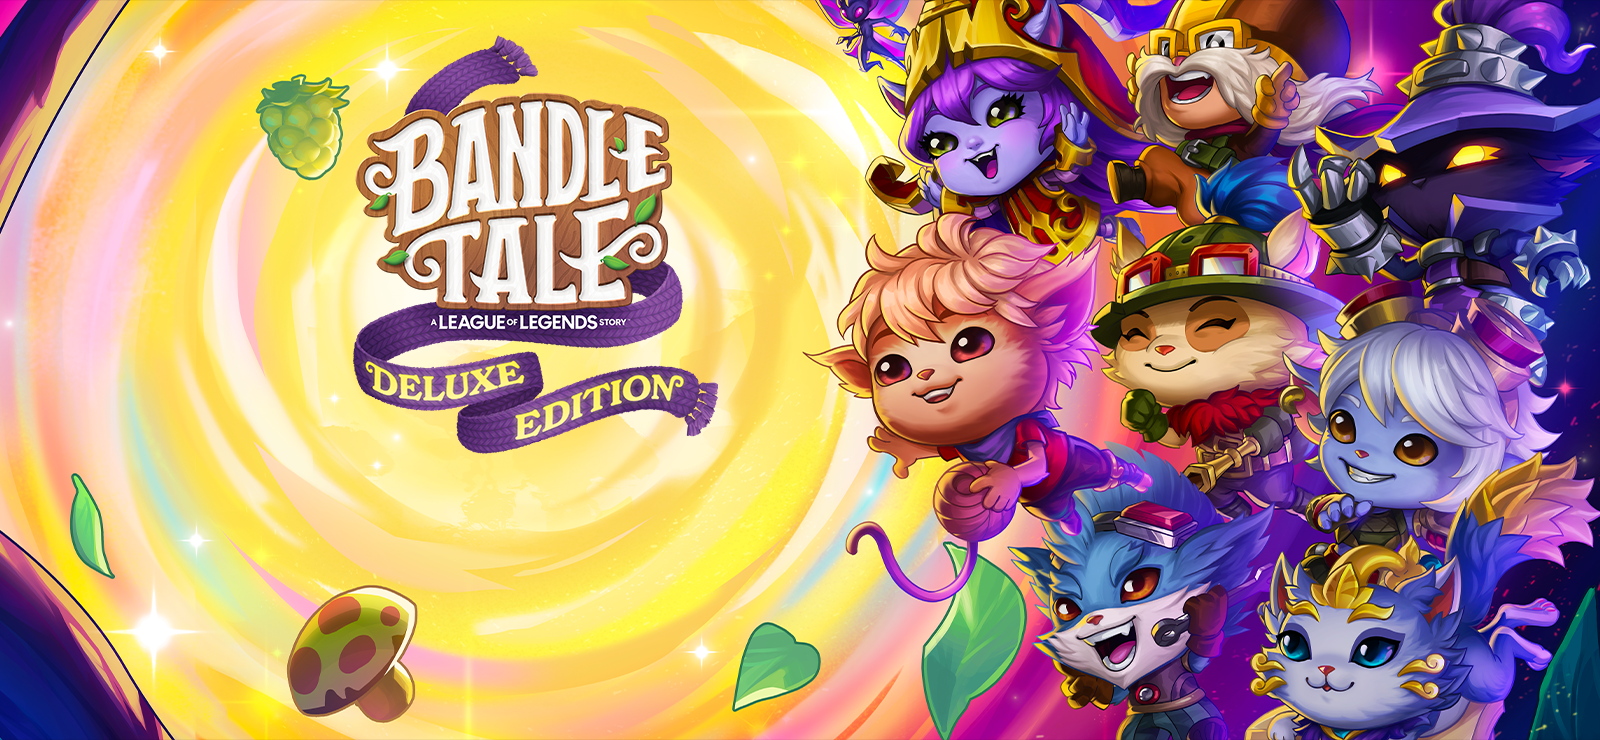 Bandle Tale: A League Of Legends Story - Deluxe Edition